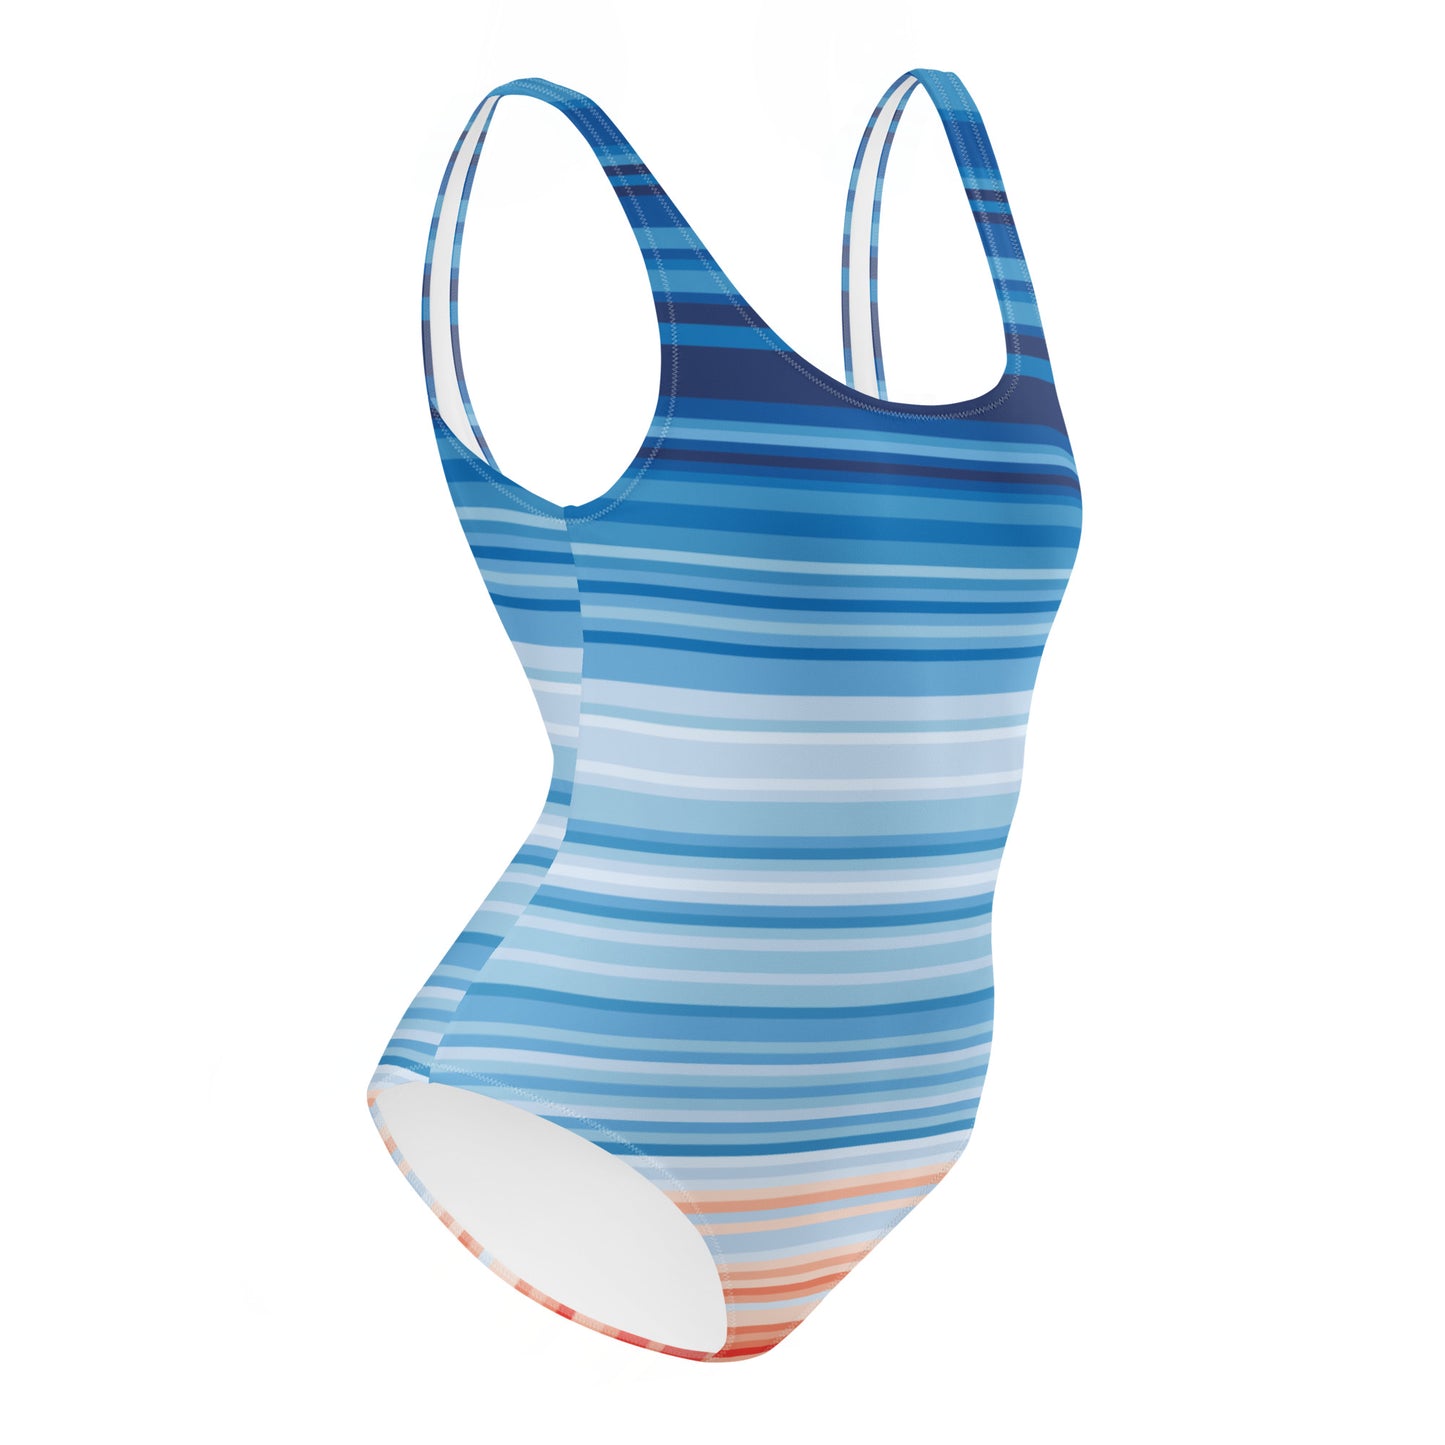 Climate Change Global Warming Stripes - Sustainably Made One-Piece Swimsuit